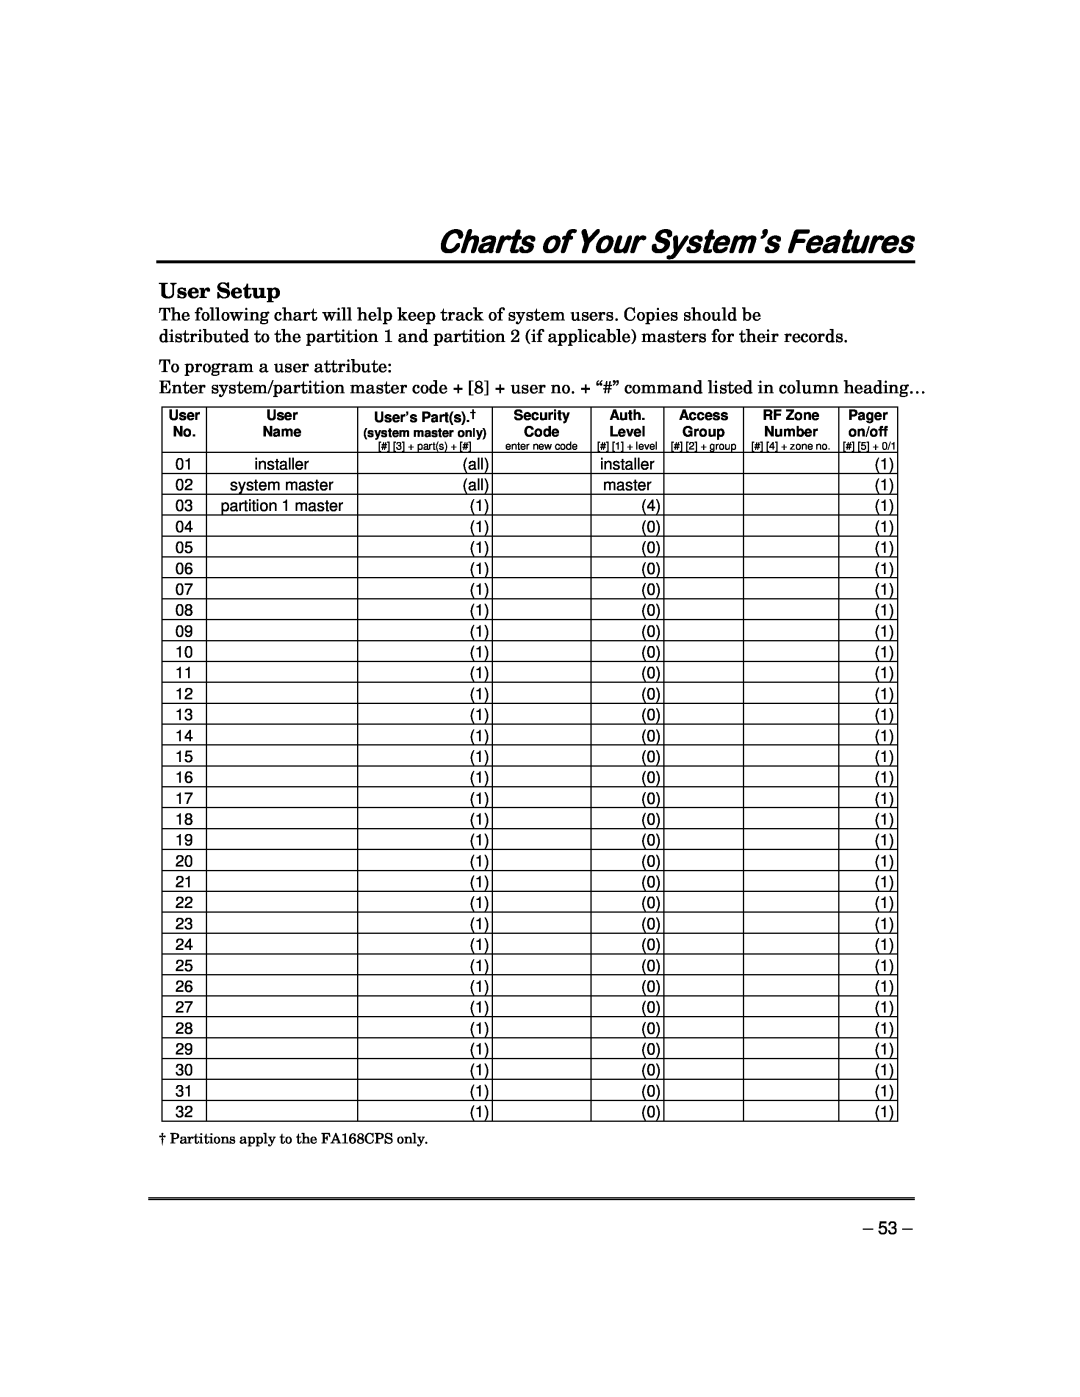 Garmin FA168CPS manual Charts of Your System’s Features, User Setup 